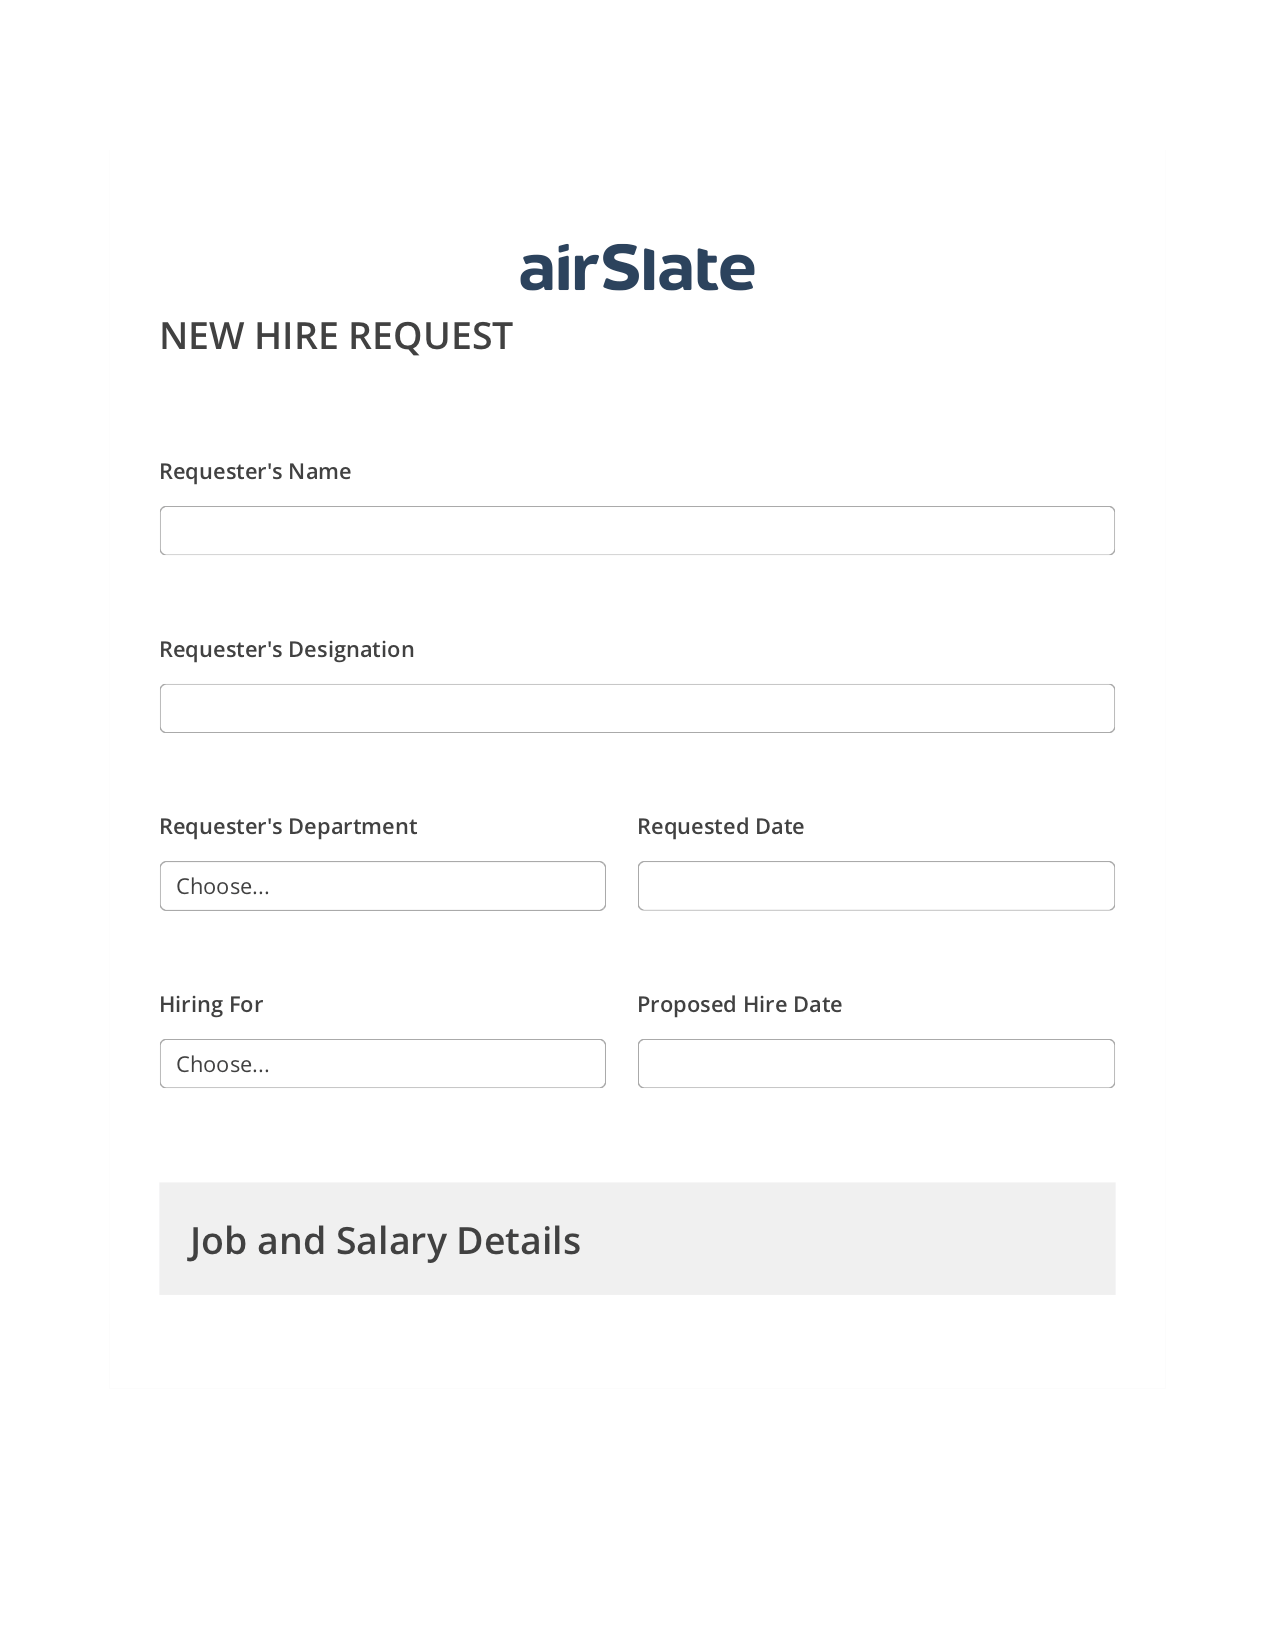 Hiring Request Workflow Pre-fill from Google Sheets Bot, Slack Notification Bot, Archive to Dropbox Bot